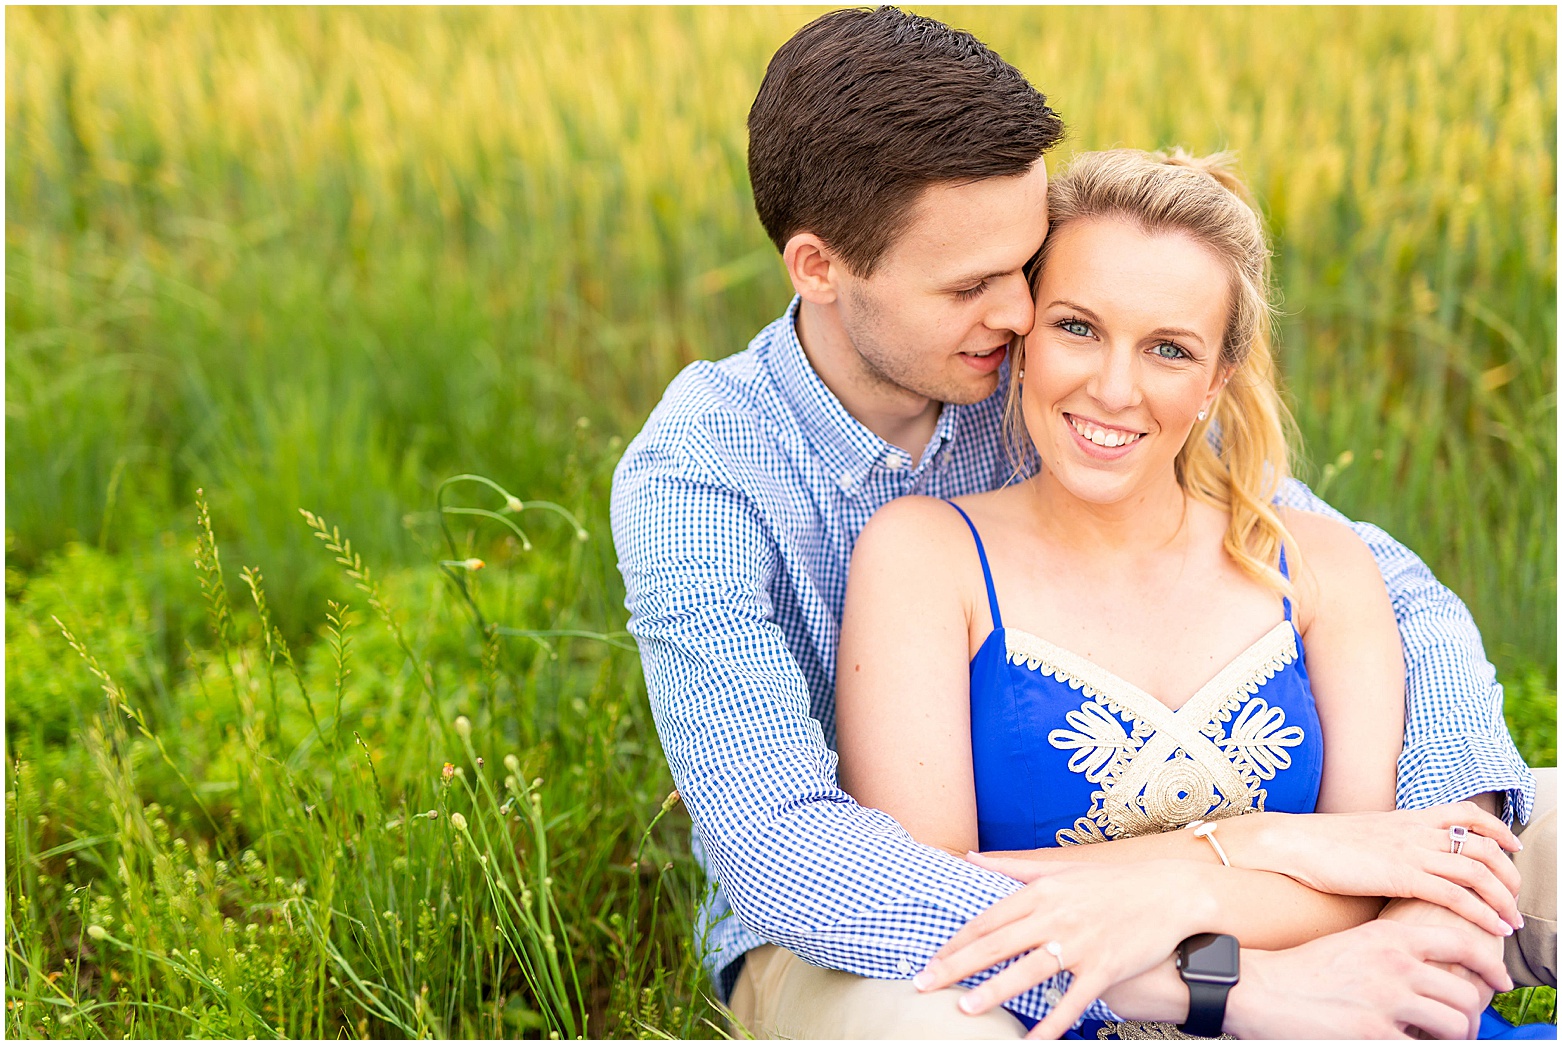 View More: http://hopetaylorphotographyphotos.pass.us/abbey-and-sam-engagement